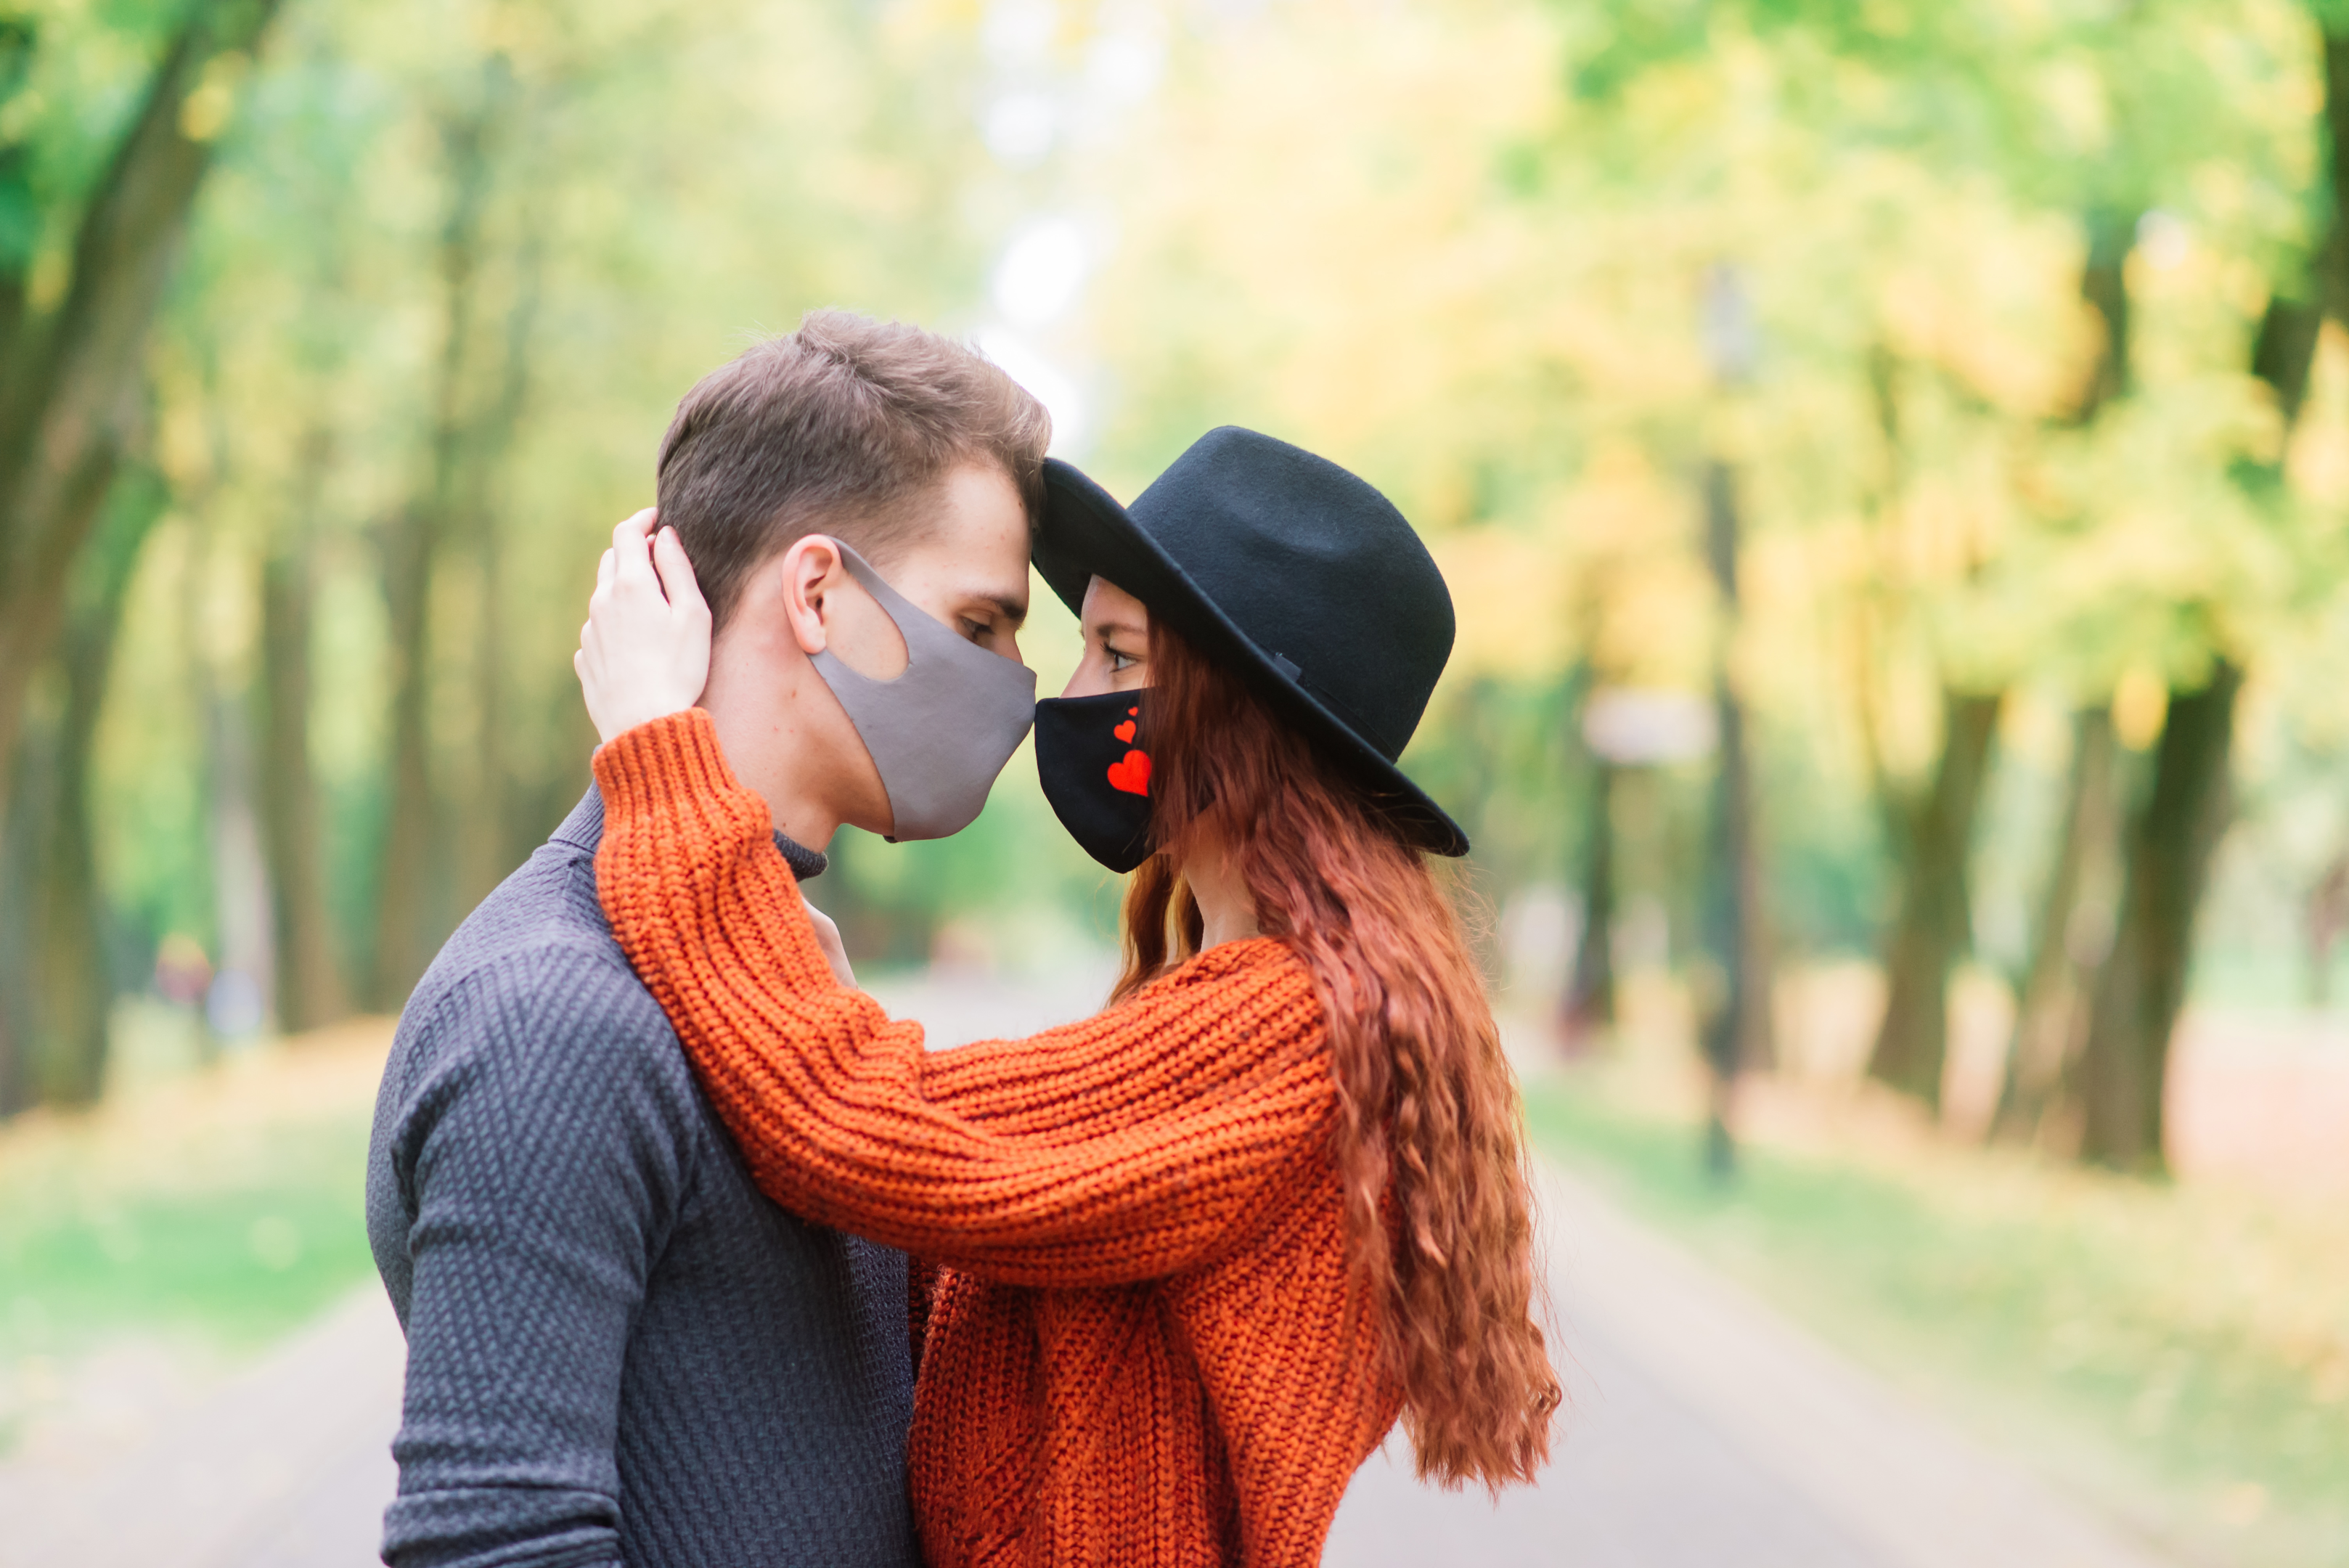 Kiss can transfer a lot of germs between you and your partner.